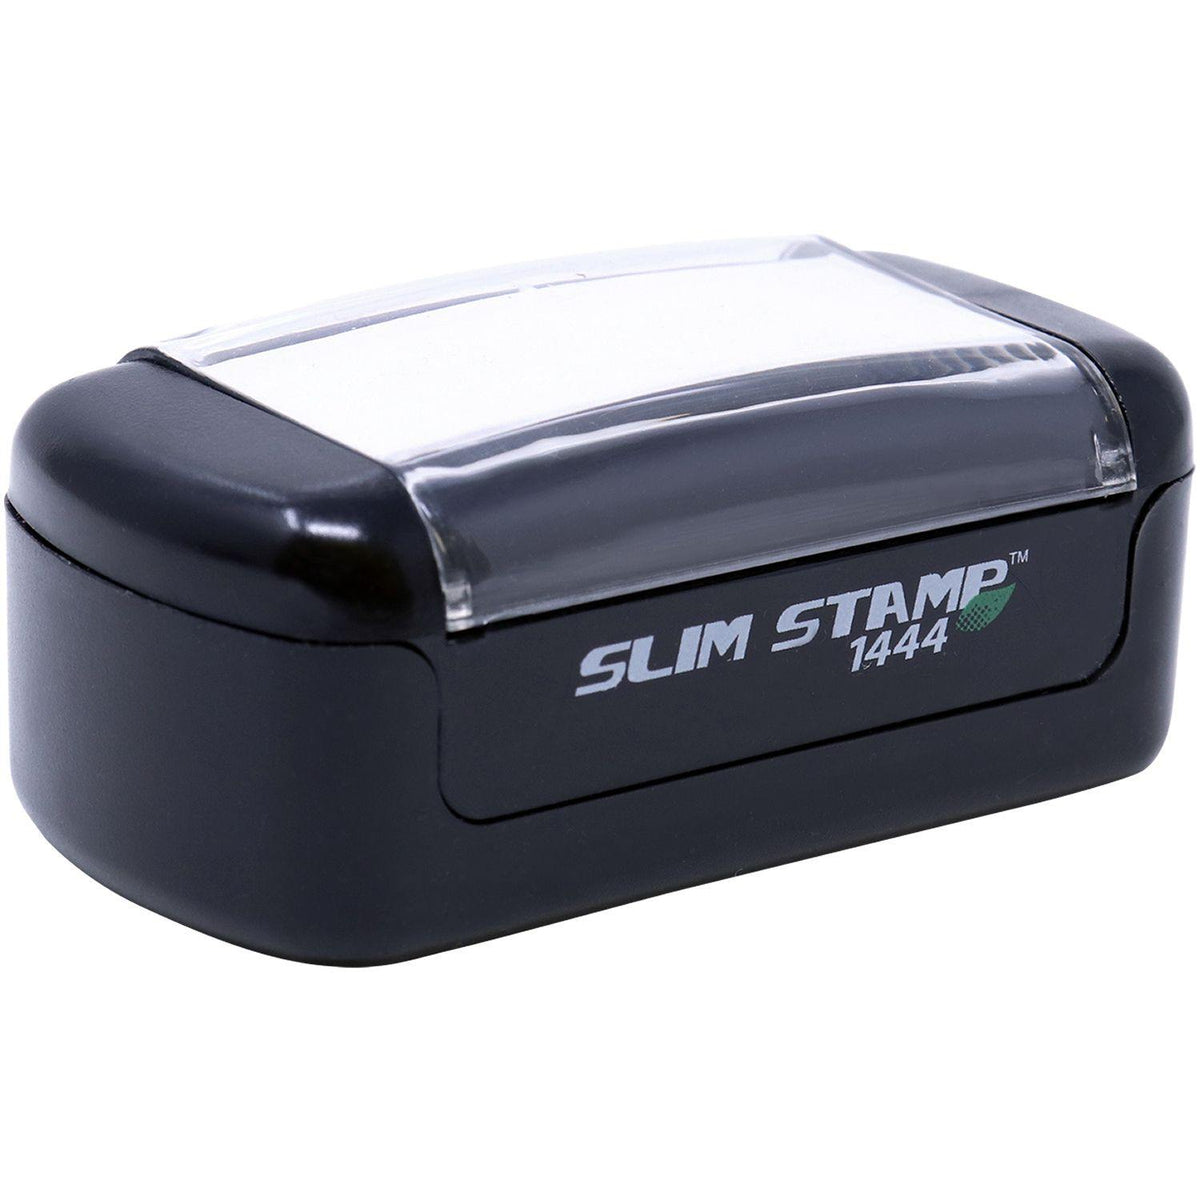 Alt View of Slim Pre-Inked Faxed on Stamp Mount Angle